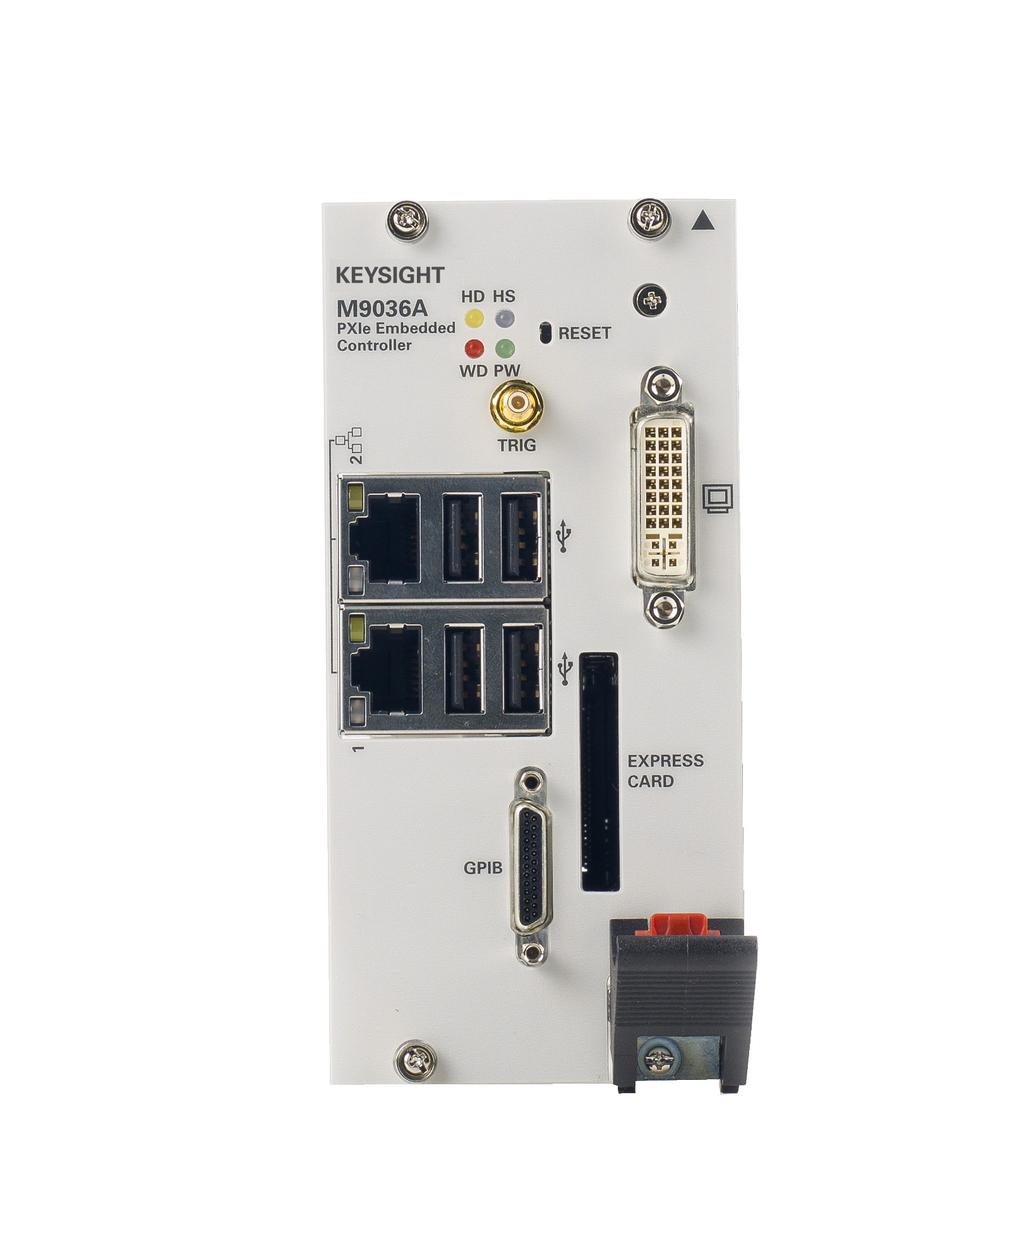 06 Keysight M9036A PXIe Embedded Controller - Data Sheet Technical Specifications and Characteristics (continued) Front panel connections Status LEDs CPU reset PXI trigger in/out DVI LAN (2) USB 2.